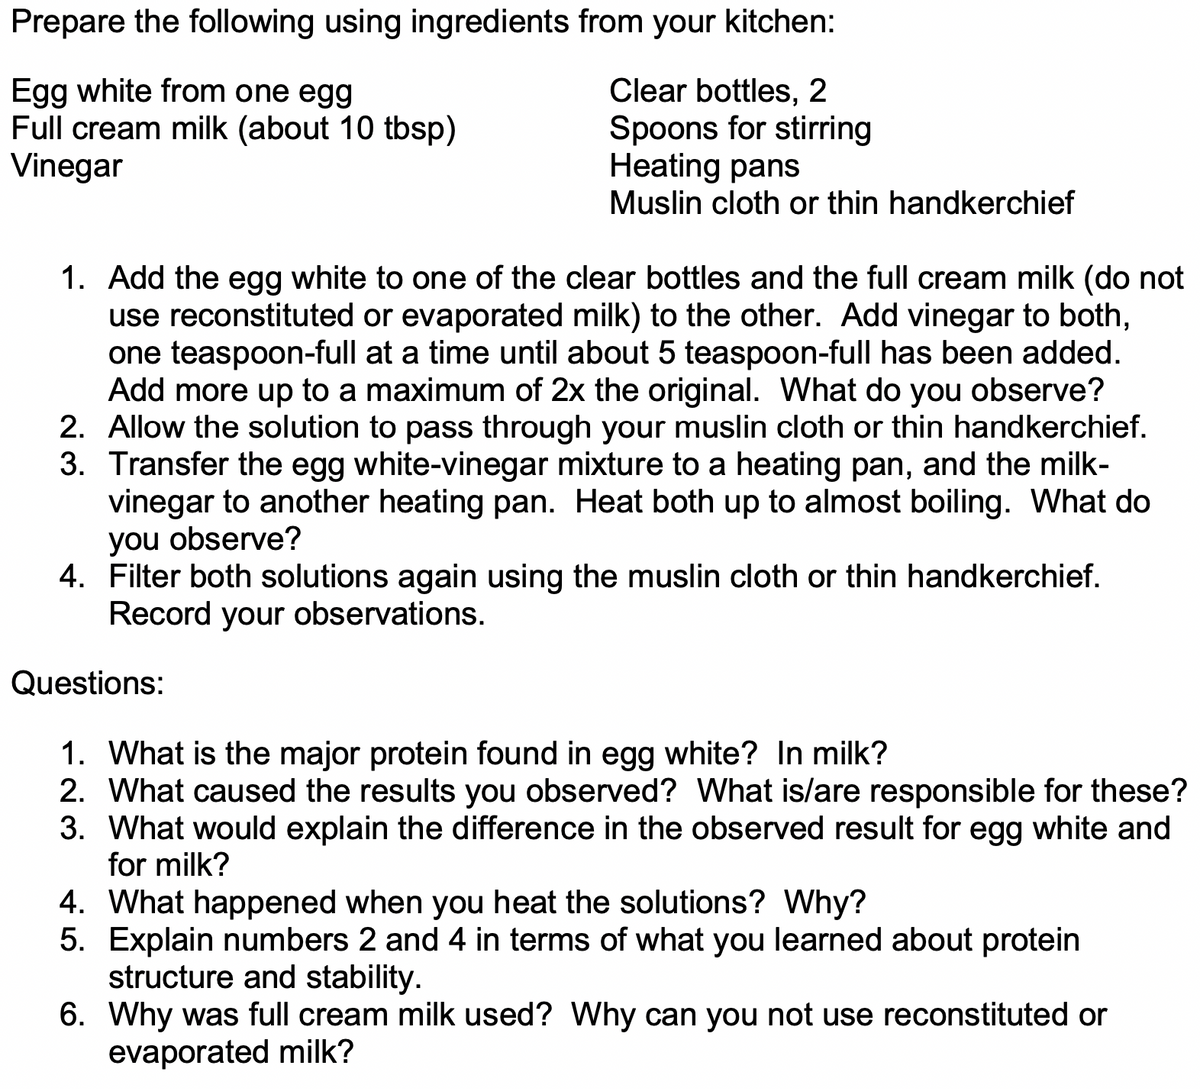 Prepare the following using ingredients from your kitchen:
Egg white from one egg
Full cream milk (about 10 tbsp)
Vinegar
Clear bottles, 2
Spoons for stirring
Heating pans
Muslin cloth or thin handkerchief
6.
1. Add the egg white to one of the clear bottles and the full cream milk (do not
use reconstituted or evaporated milk) to the other. Add vinegar to both,
one teaspoon-full at a time until about 5 teaspoon-full has been added.
Add more up to a maximum of 2x the original. What do you observe?
2. Allow the solution to pass through your muslin cloth or thin handkerchief.
3. Transfer the egg white-vinegar mixture to a heating pan, and the milk-
vinegar to another heating pan. Heat both up to almost boiling. What do
you observe?
4. Filter both solutions again using the muslin cloth or thin handkerchief.
Record your observations.
Questions:
1. What is the major protein found in egg white? In milk?
2. What caused the results you observed? What is/are responsible for these?
3. What would explain the difference in the observed result for egg white and
for milk?
4. What happened when you heat the solutions? Why?
5. Explain numbers 2 and 4 in terms of what you learned about protein
structure and stability.
6. Why was full cream milk used? Why can you not use reconstituted or
evaporated milk?
